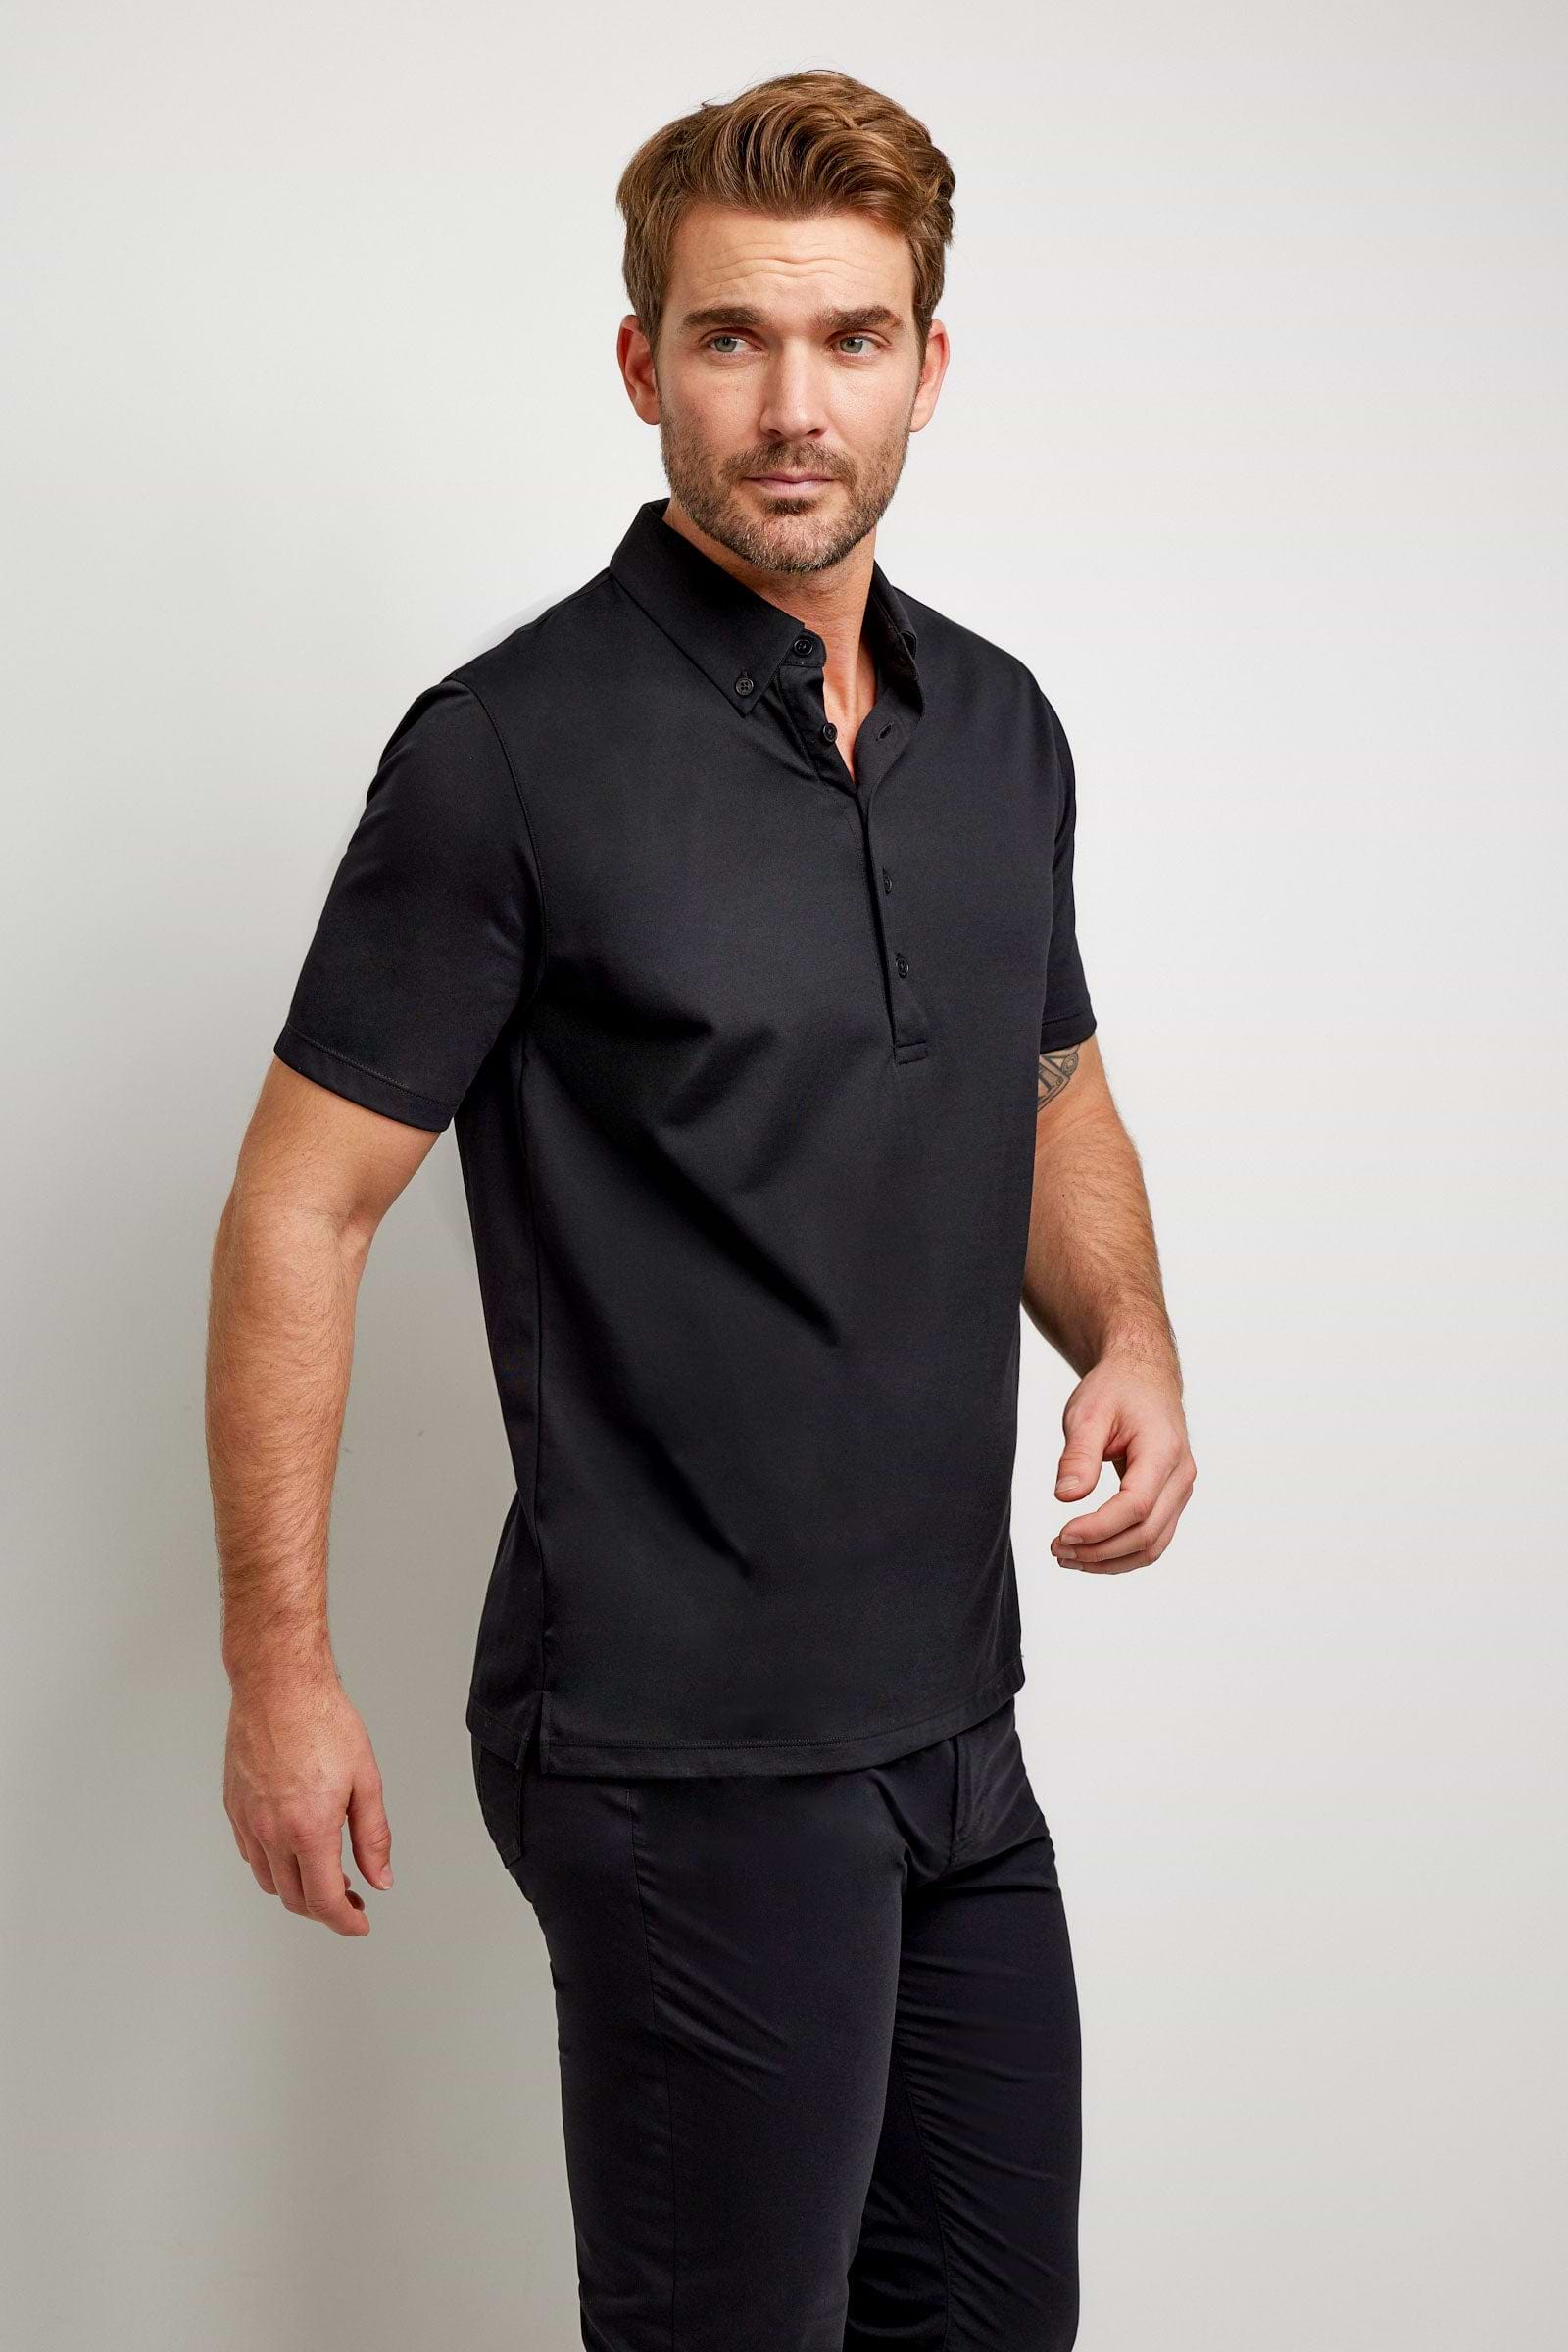 The Best Travel Top. Man Showing the Side Profile of a Men's Ryan Polo in Black.